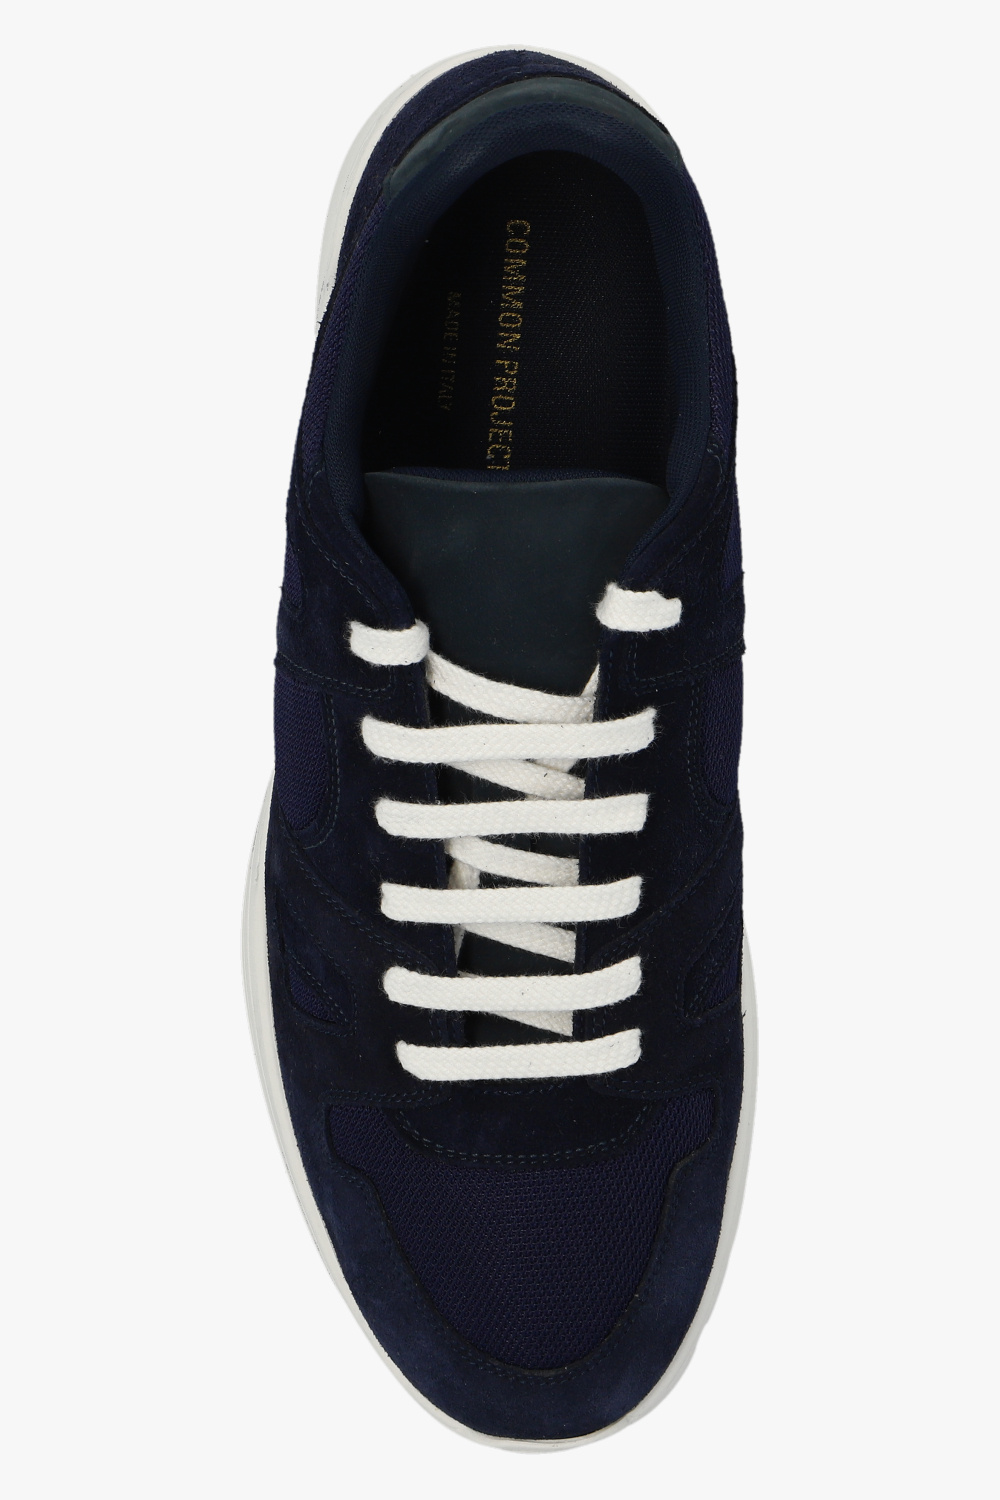 Common Projects ‘Cross Trainer’ sneakers